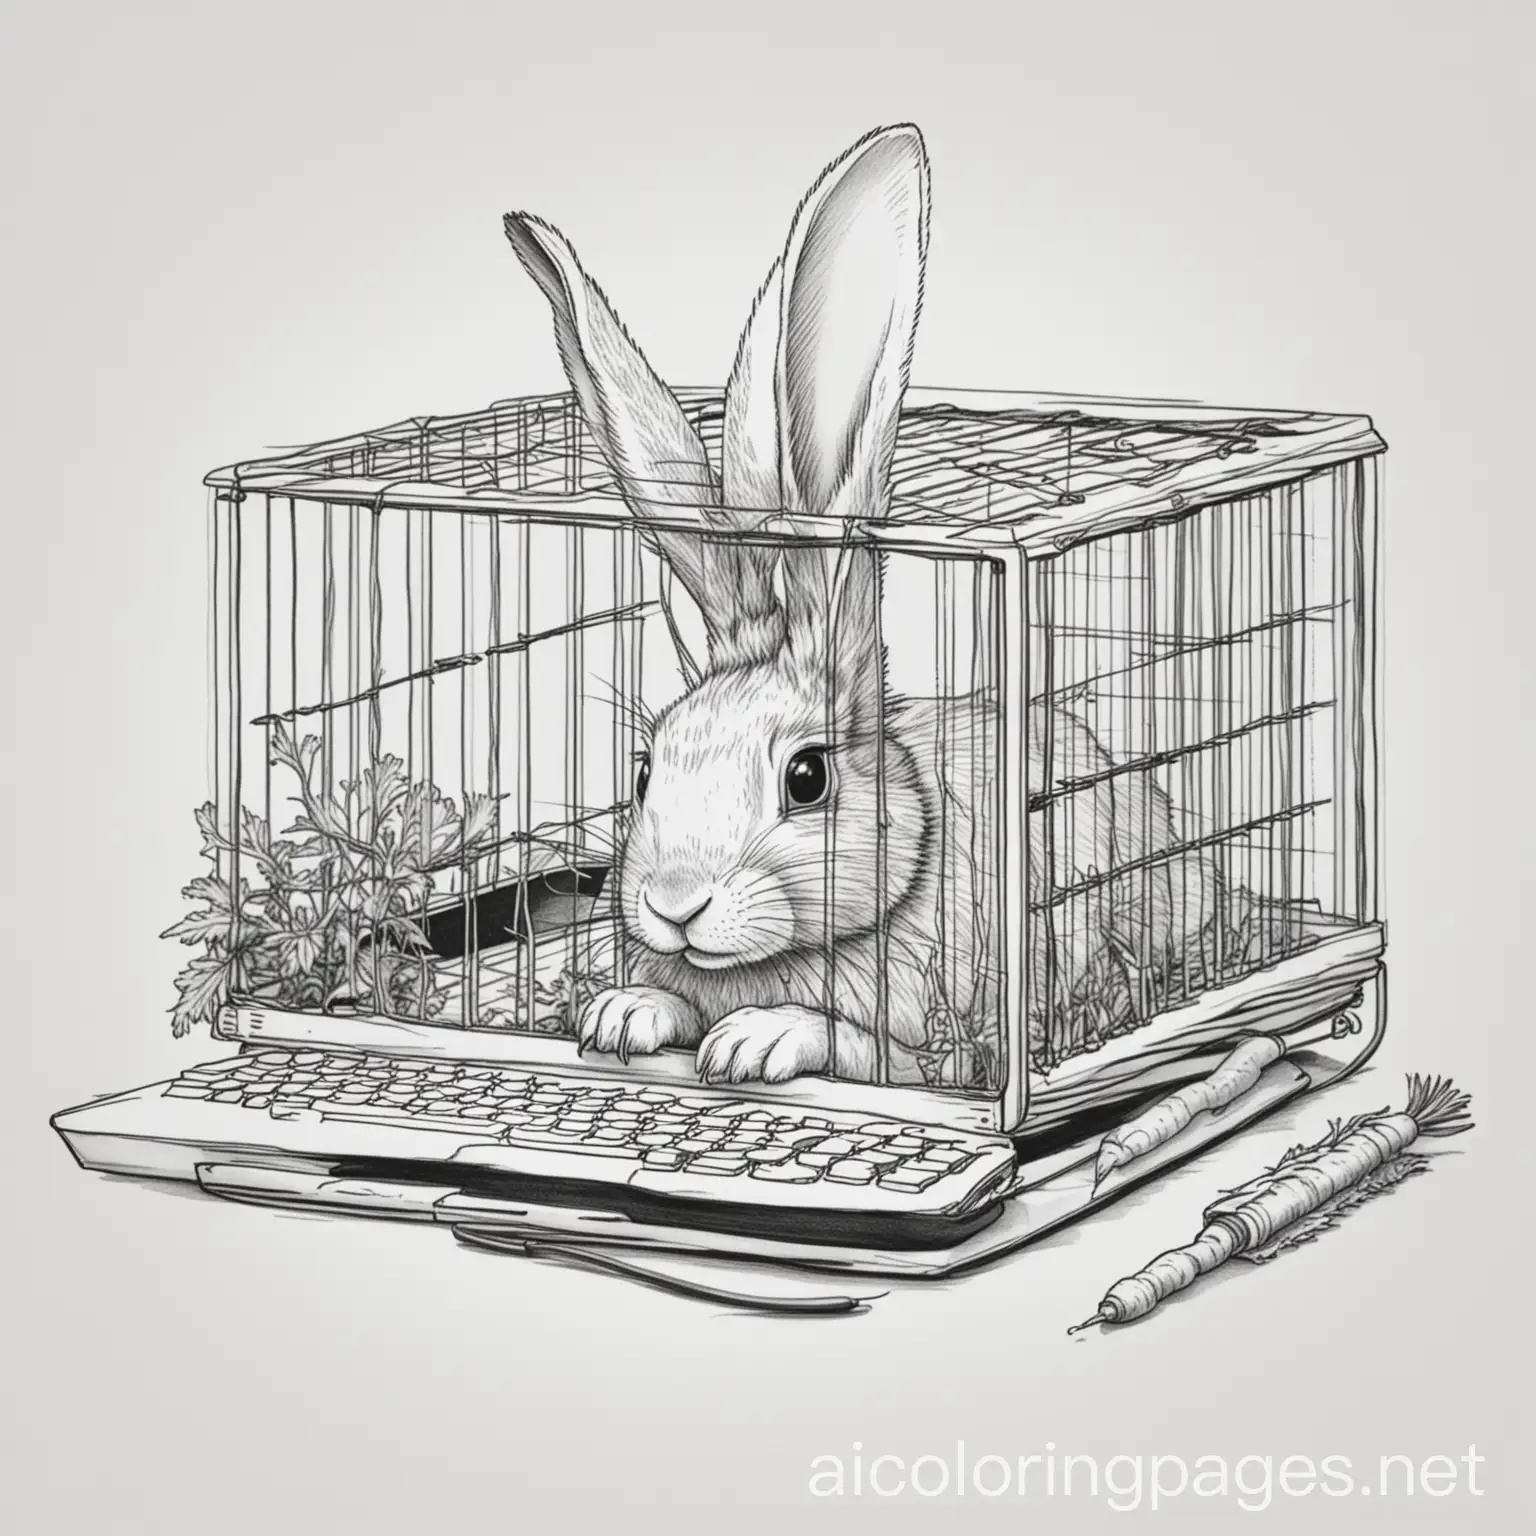 Rabbit-Eating-Carrot-in-Cage-Next-to-Computer-Coloring-Page